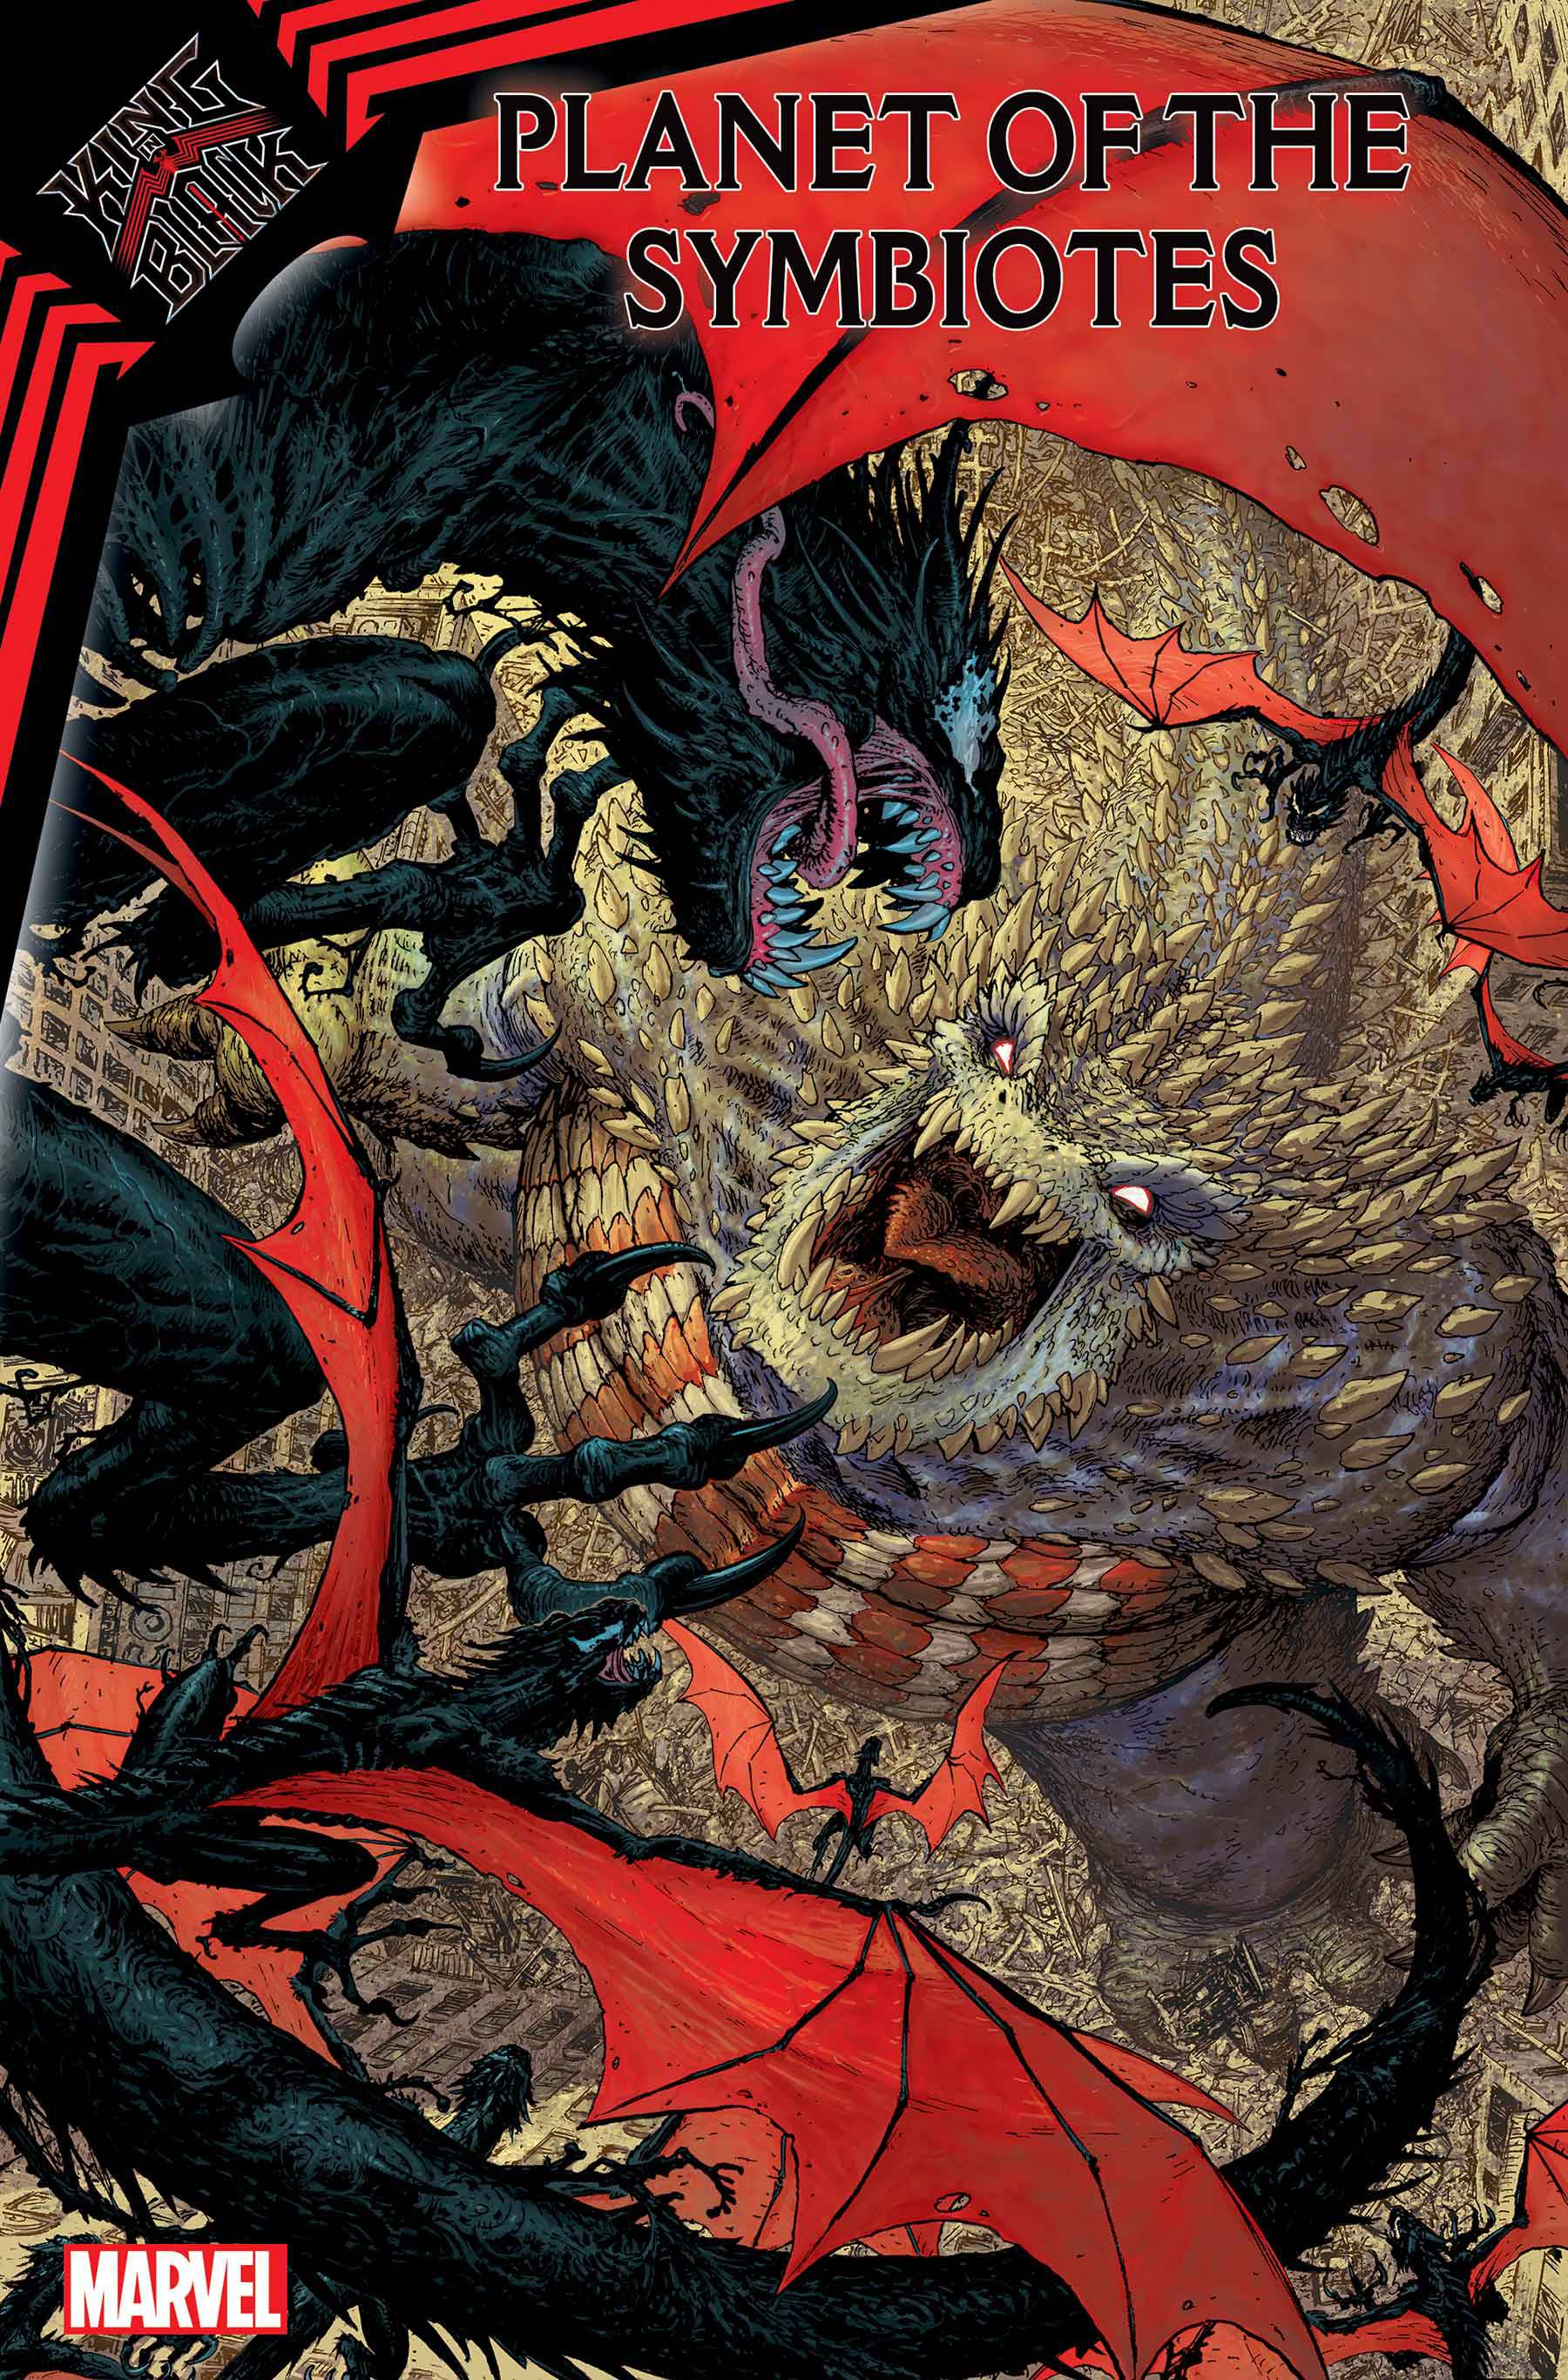 KING IN BLACK PLANET OF SYMBIOTES #2 (OF 3) 02/17/21